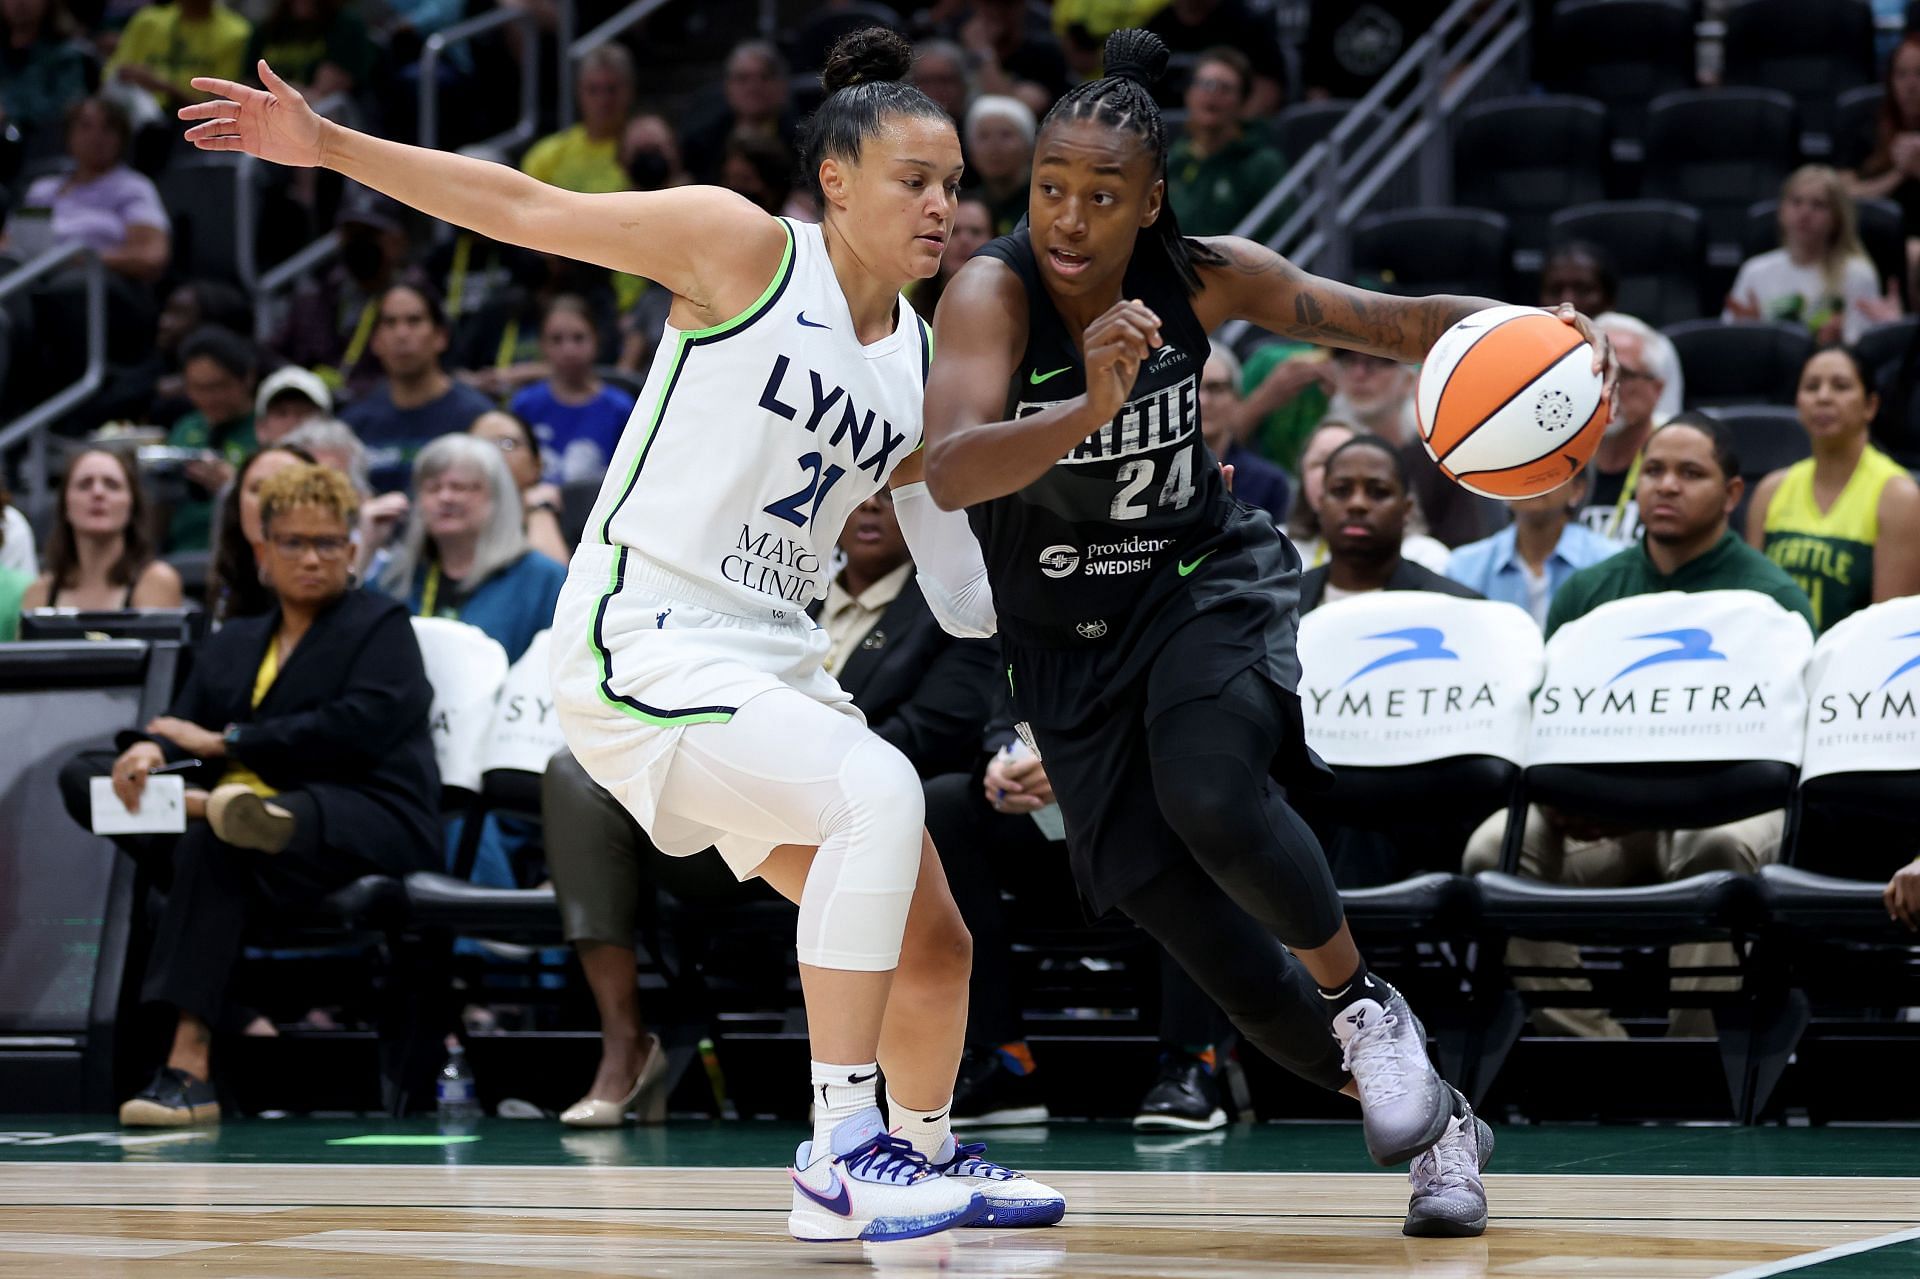 The Lynx can have a better defender if they will pick Reese.